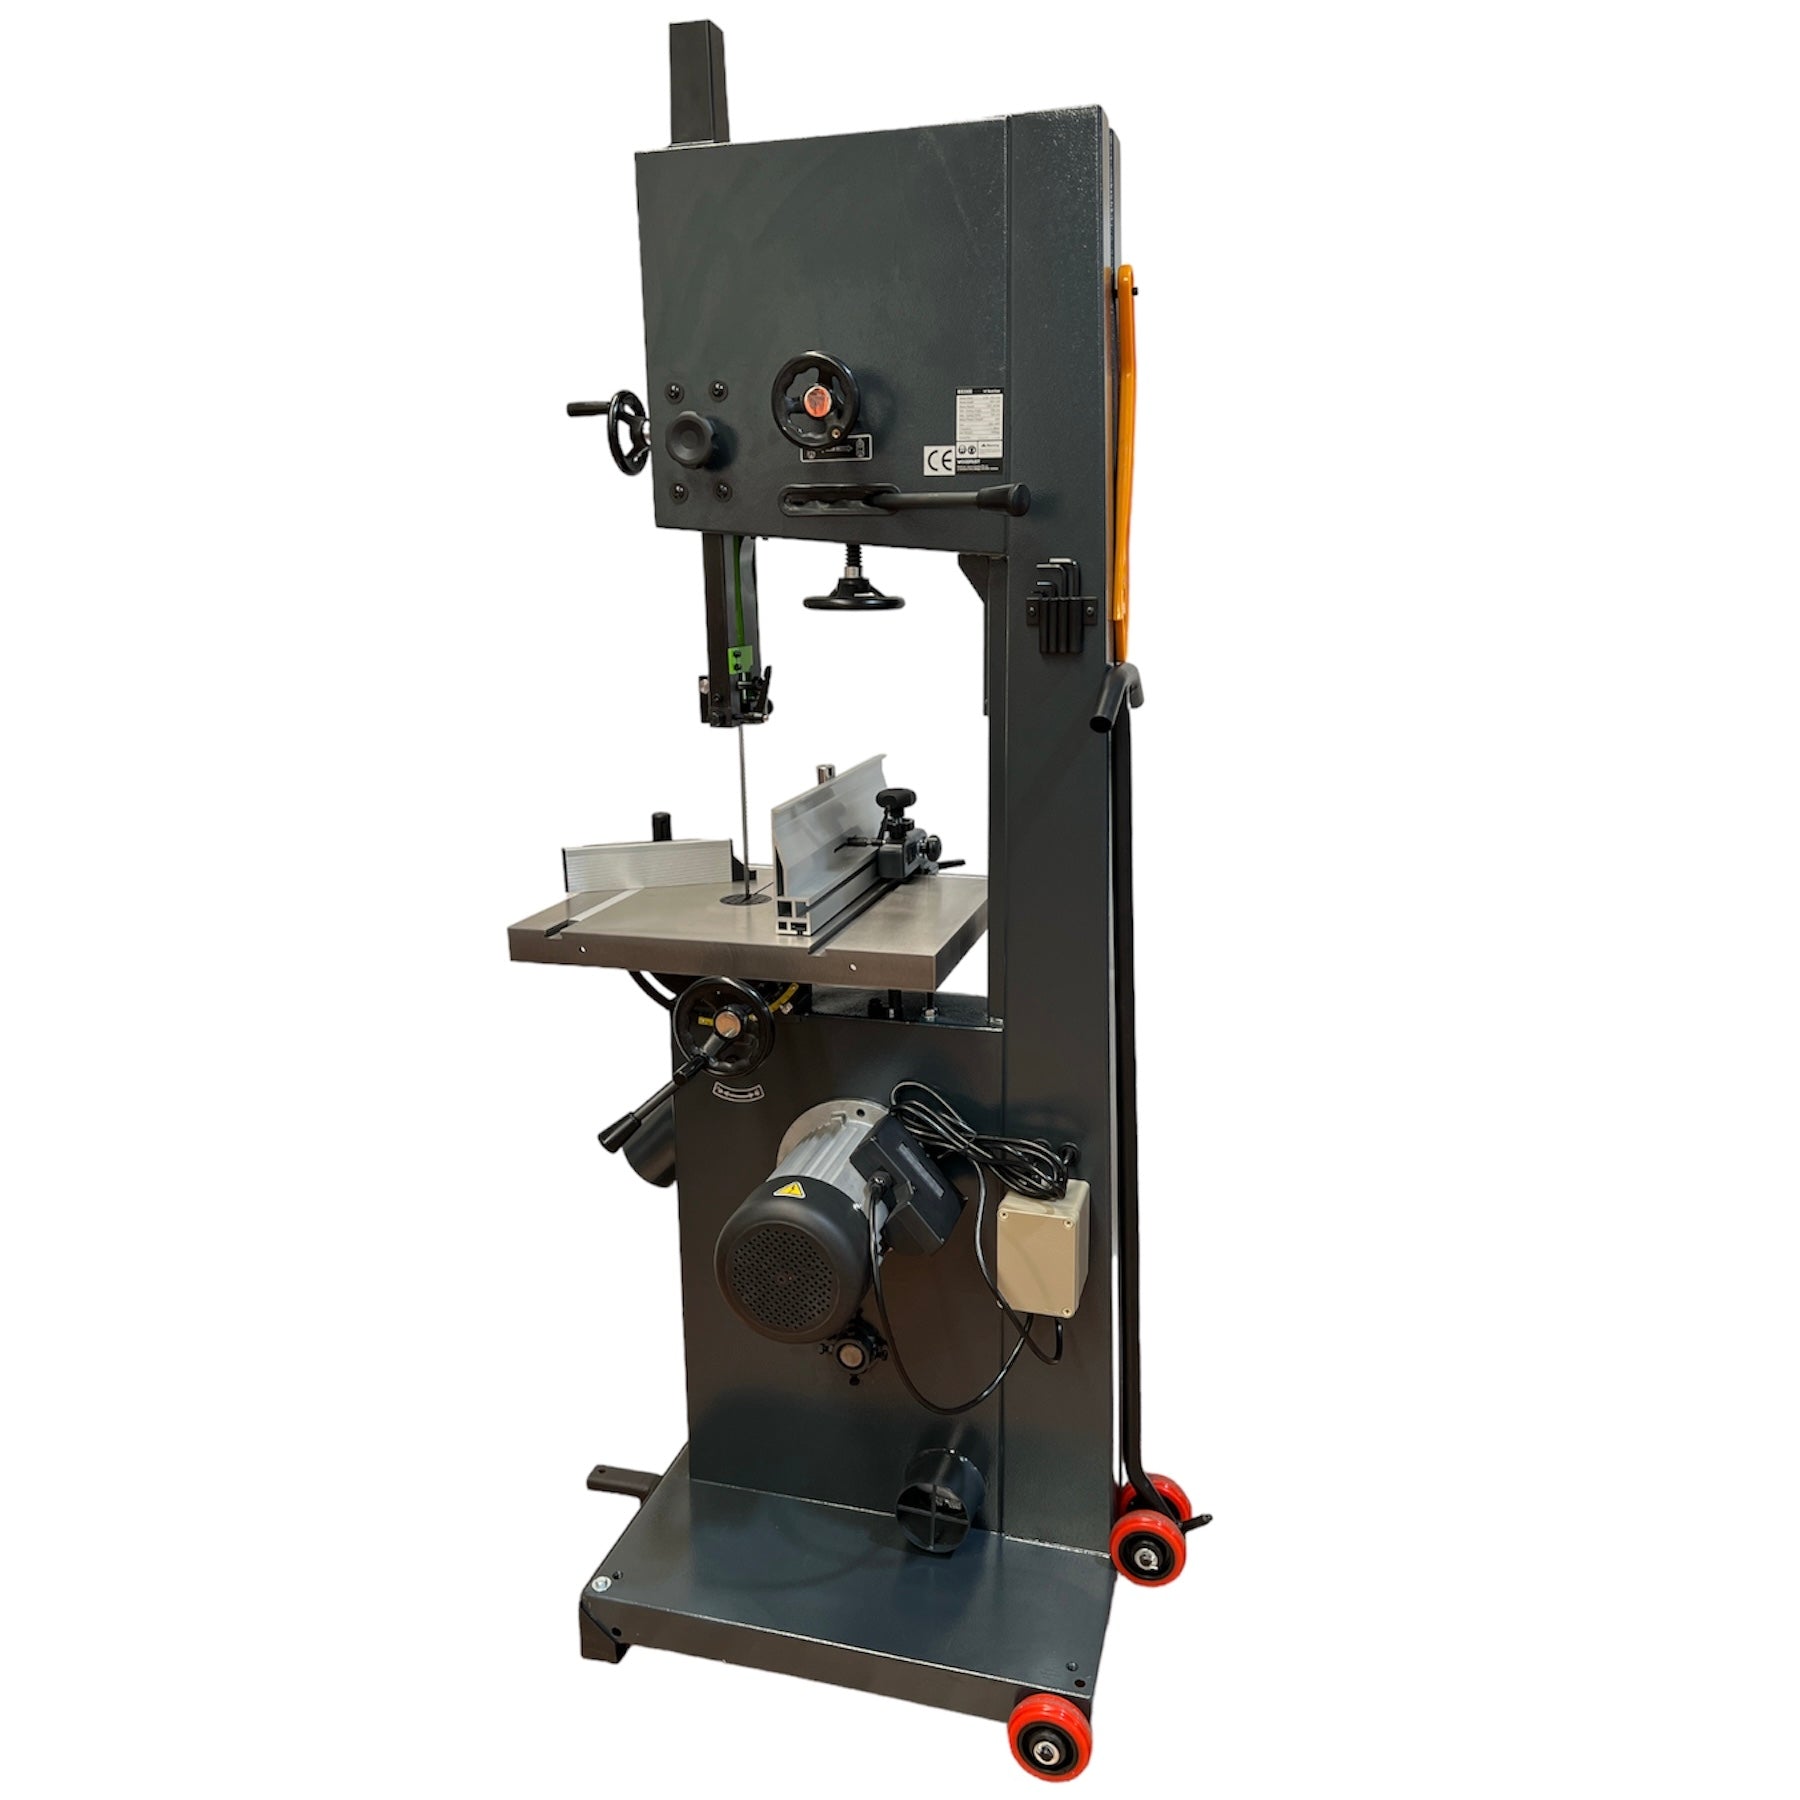 350mm (14") Professional Bandsaw 3HP 240V BS350E by Woodfast *New Arrival*